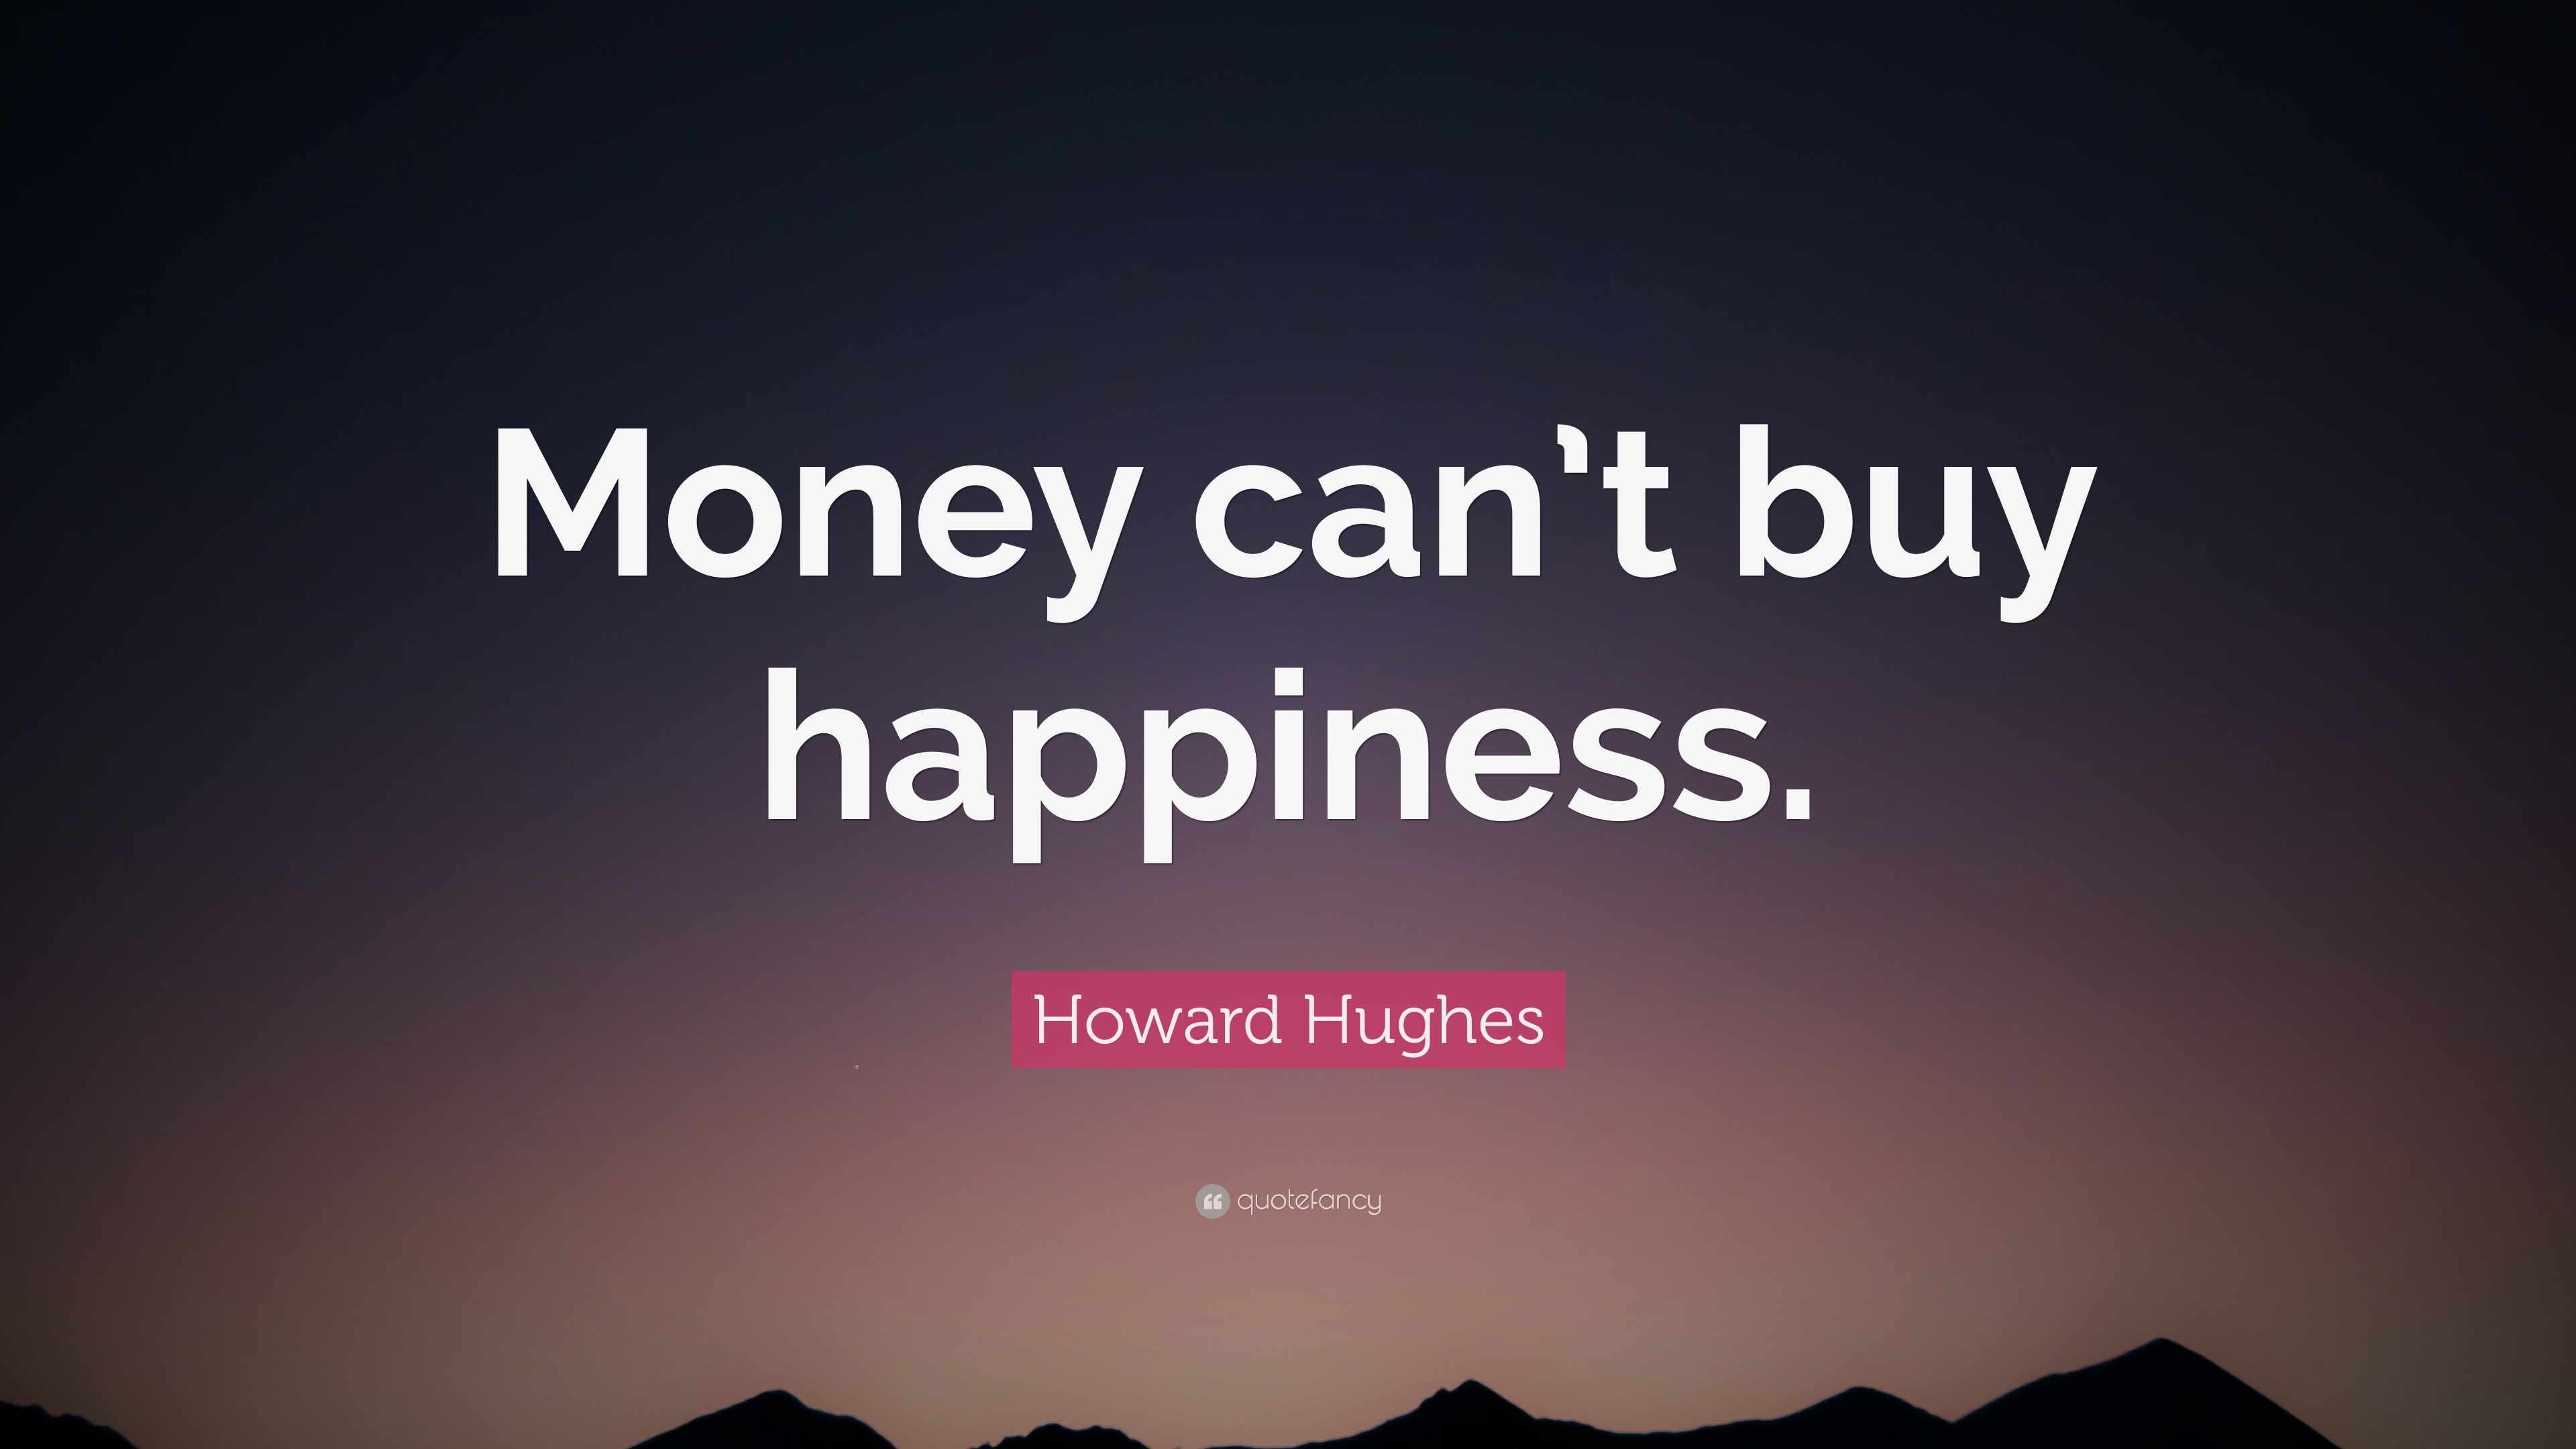 Money can't buy happiness essay